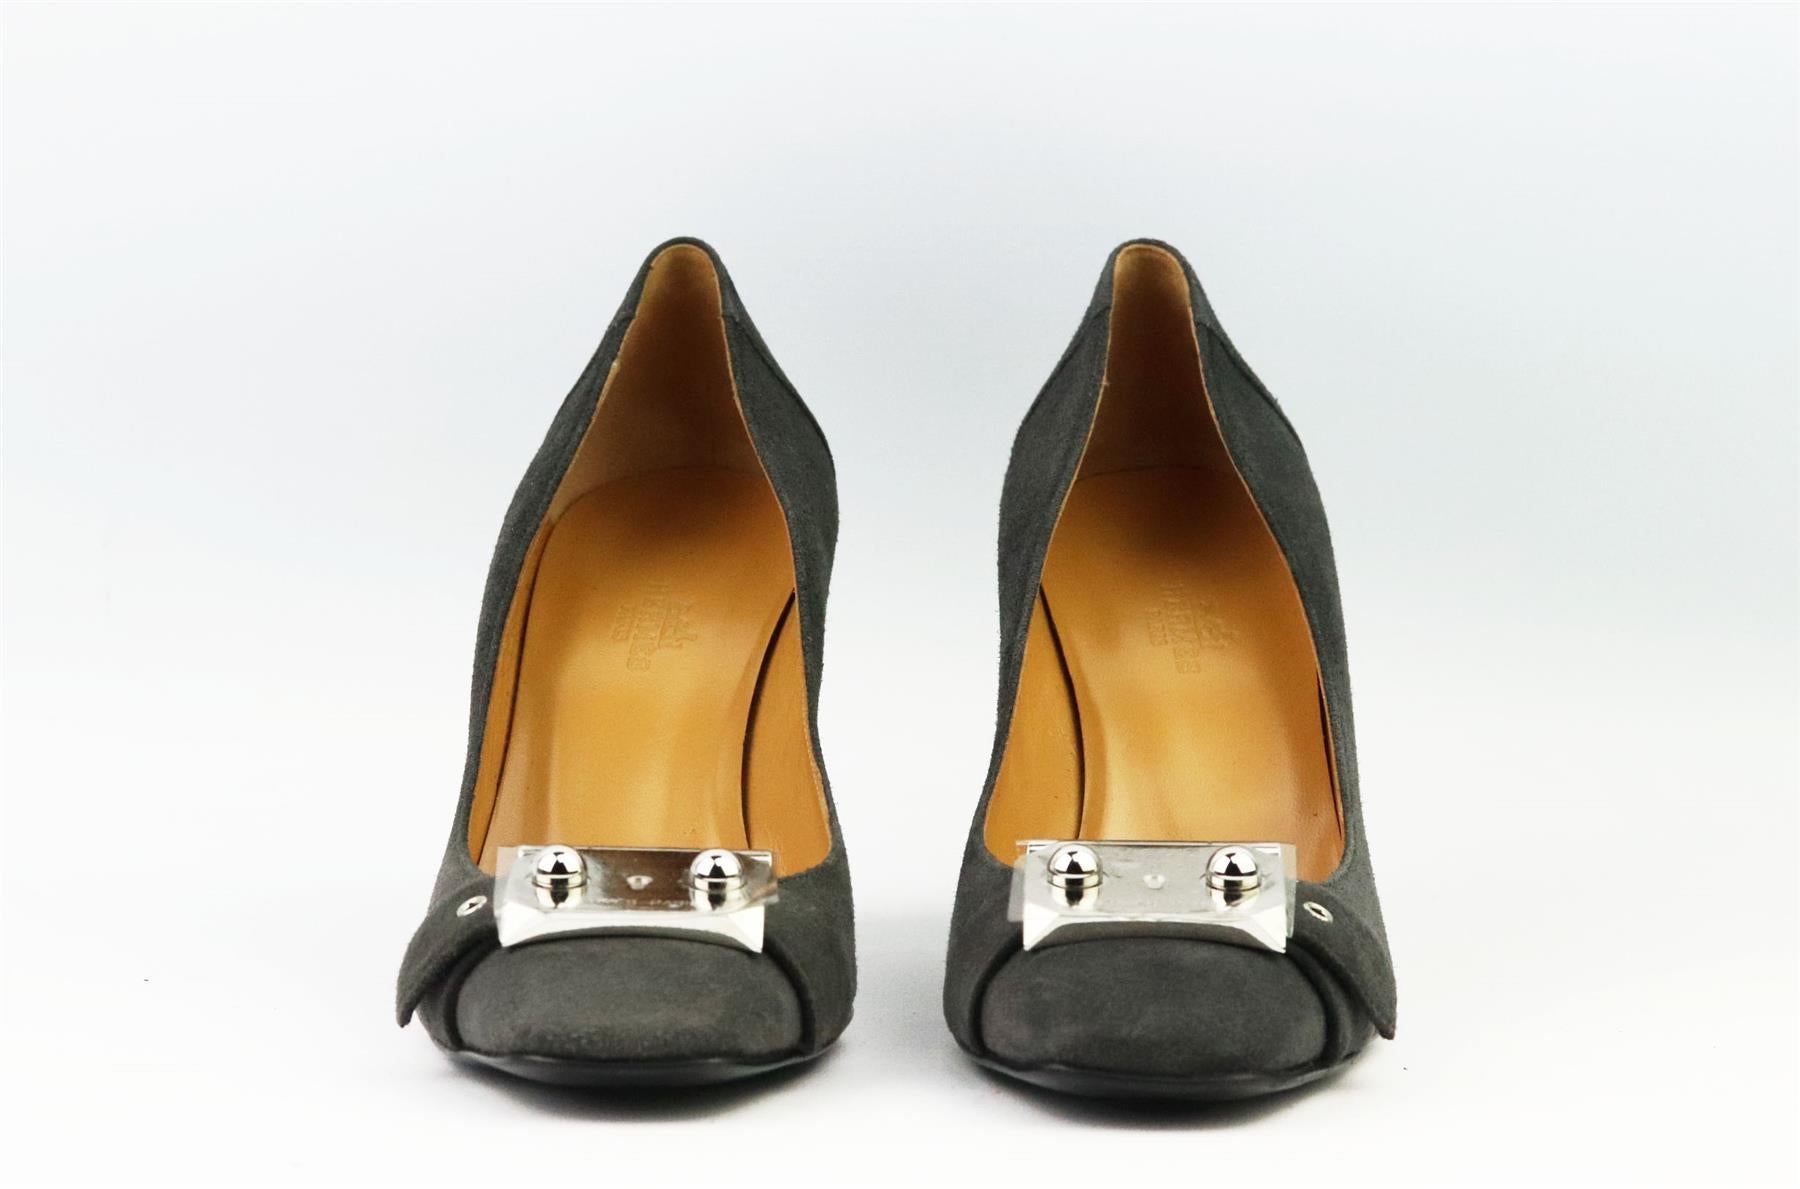 These pumps by Hermès are a classic style that will never date, made in Italy from supple grey suede, they have square toes and silver-tone buckle detail that can be seen throughout Hermès collections. Heel measures approximately 76 mm/ 3 inches.